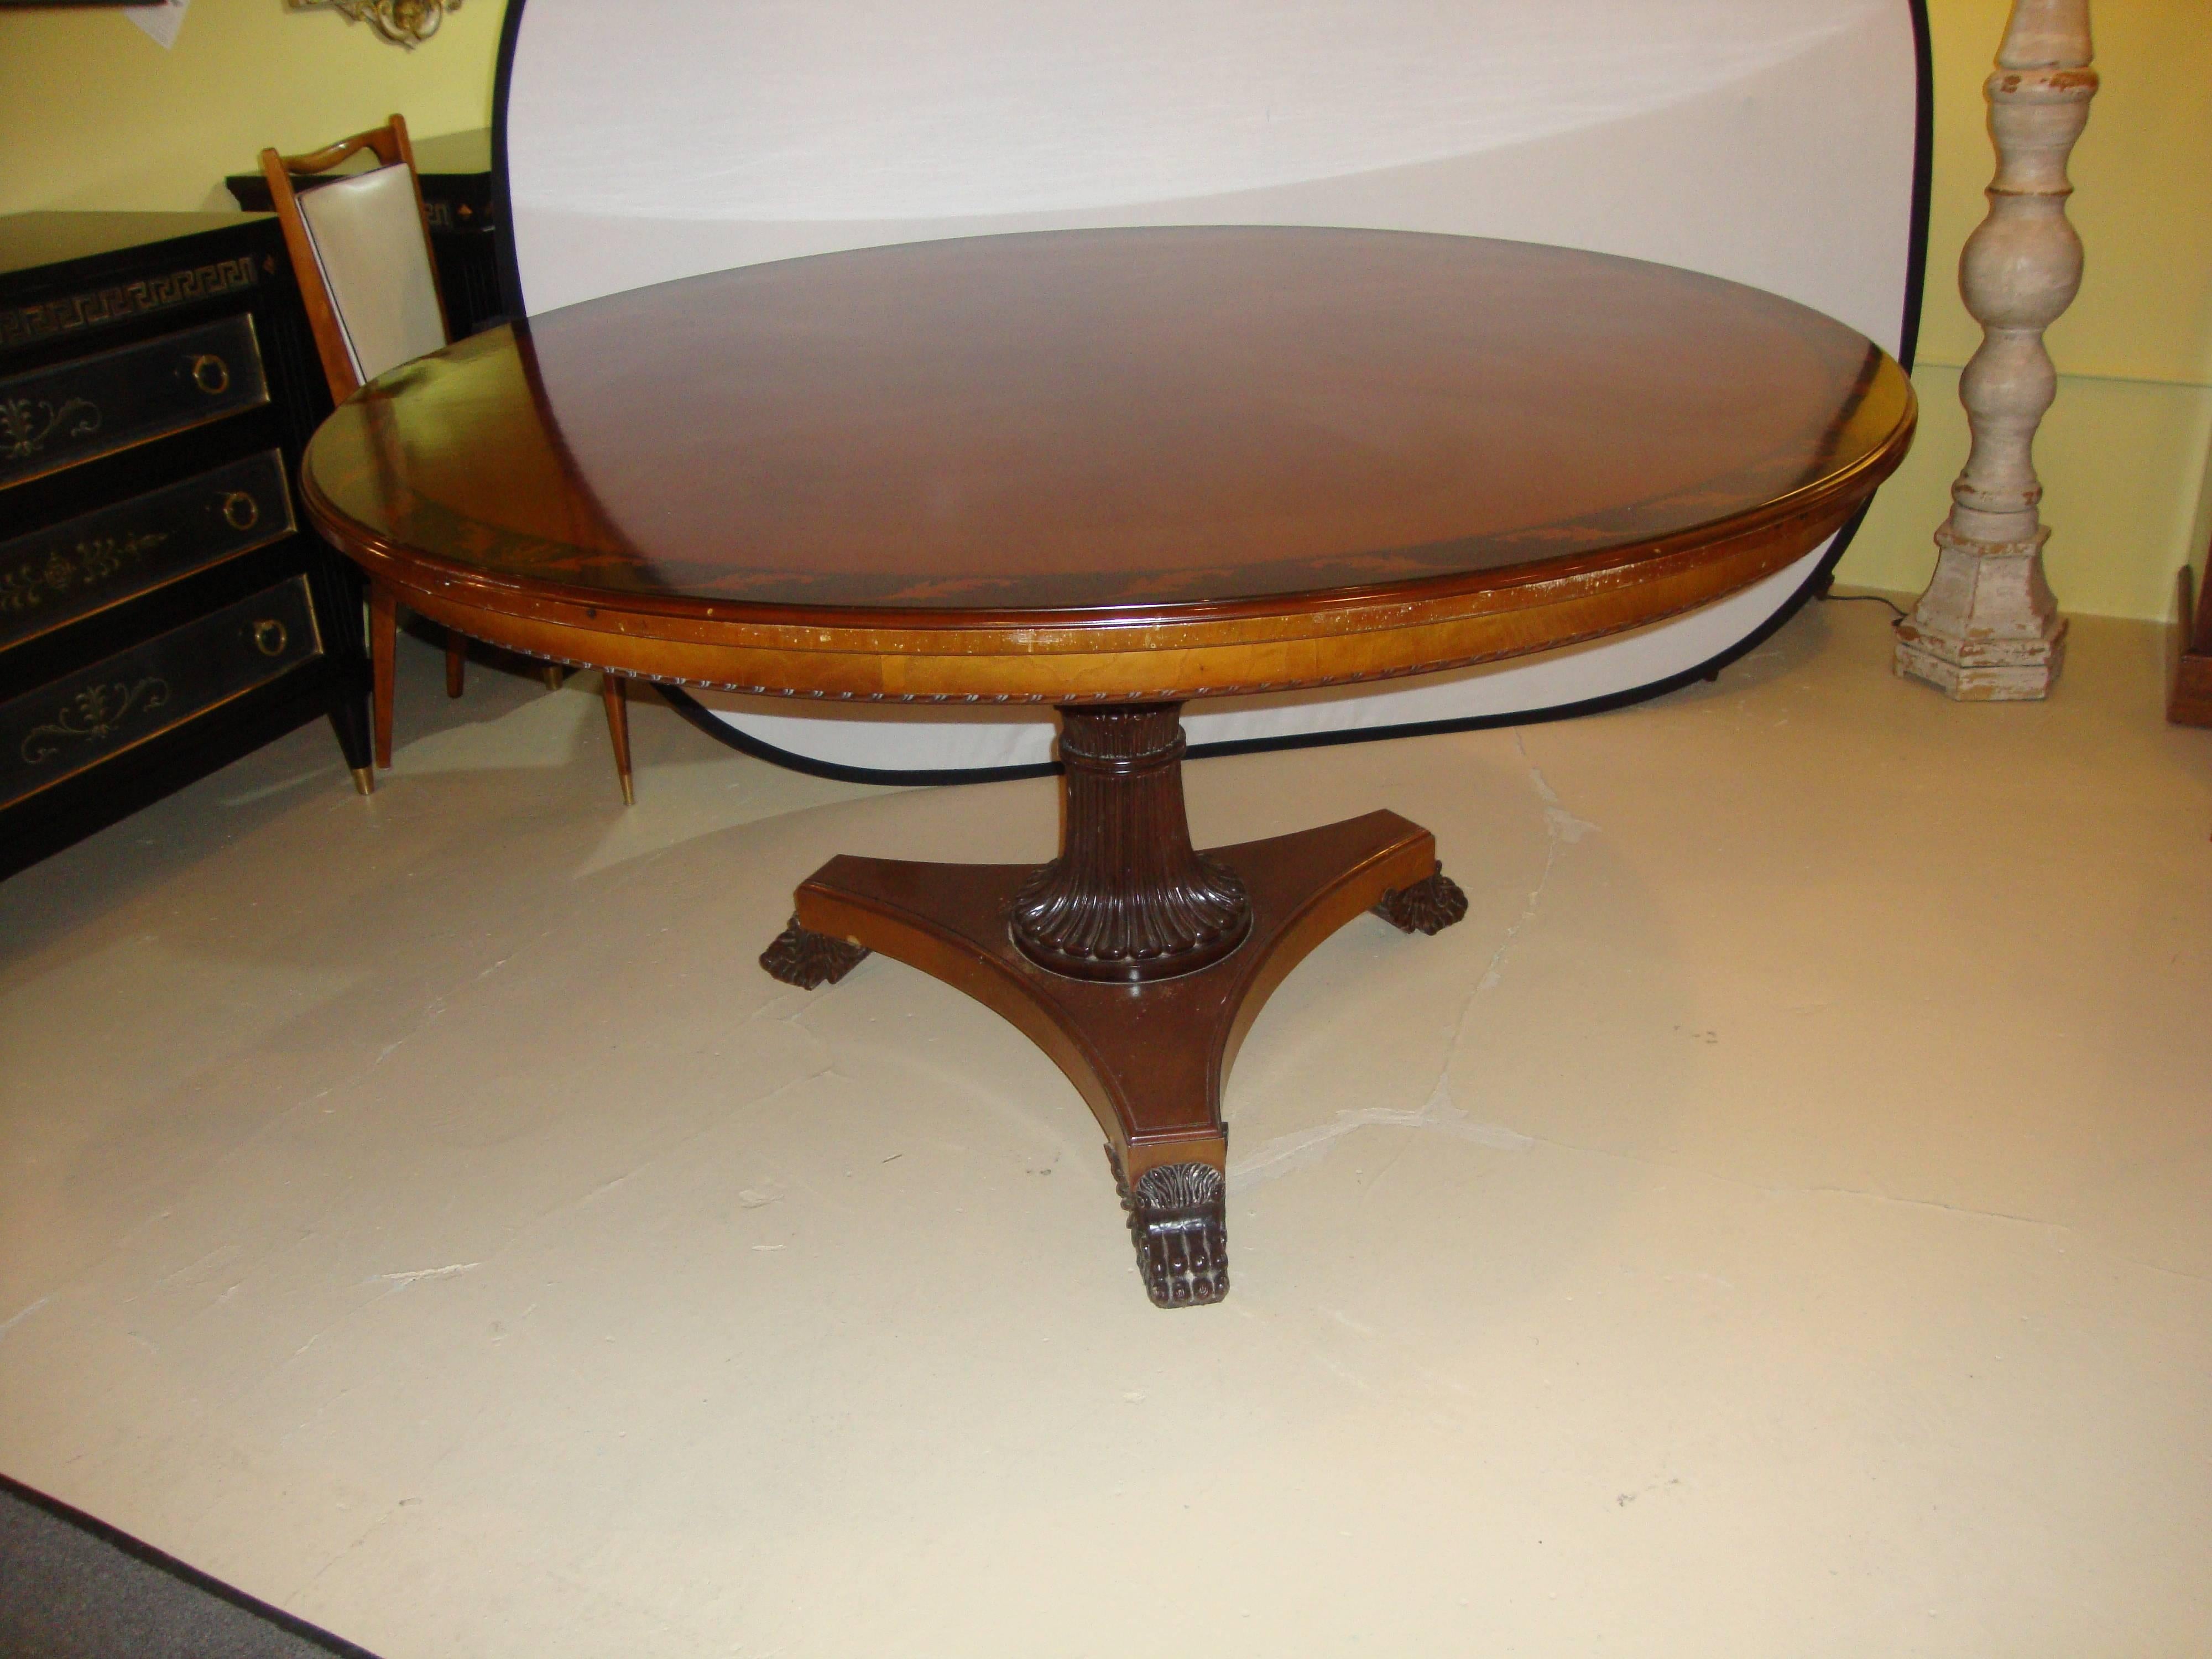 Regency style center or dining table ebony and burl woods. This fine table coming directly out of the Garden City Long Island Mansion of one of the leading Spinal Surgeons in the country. Possibly by Maitland-Smith with a walnut top having ebony